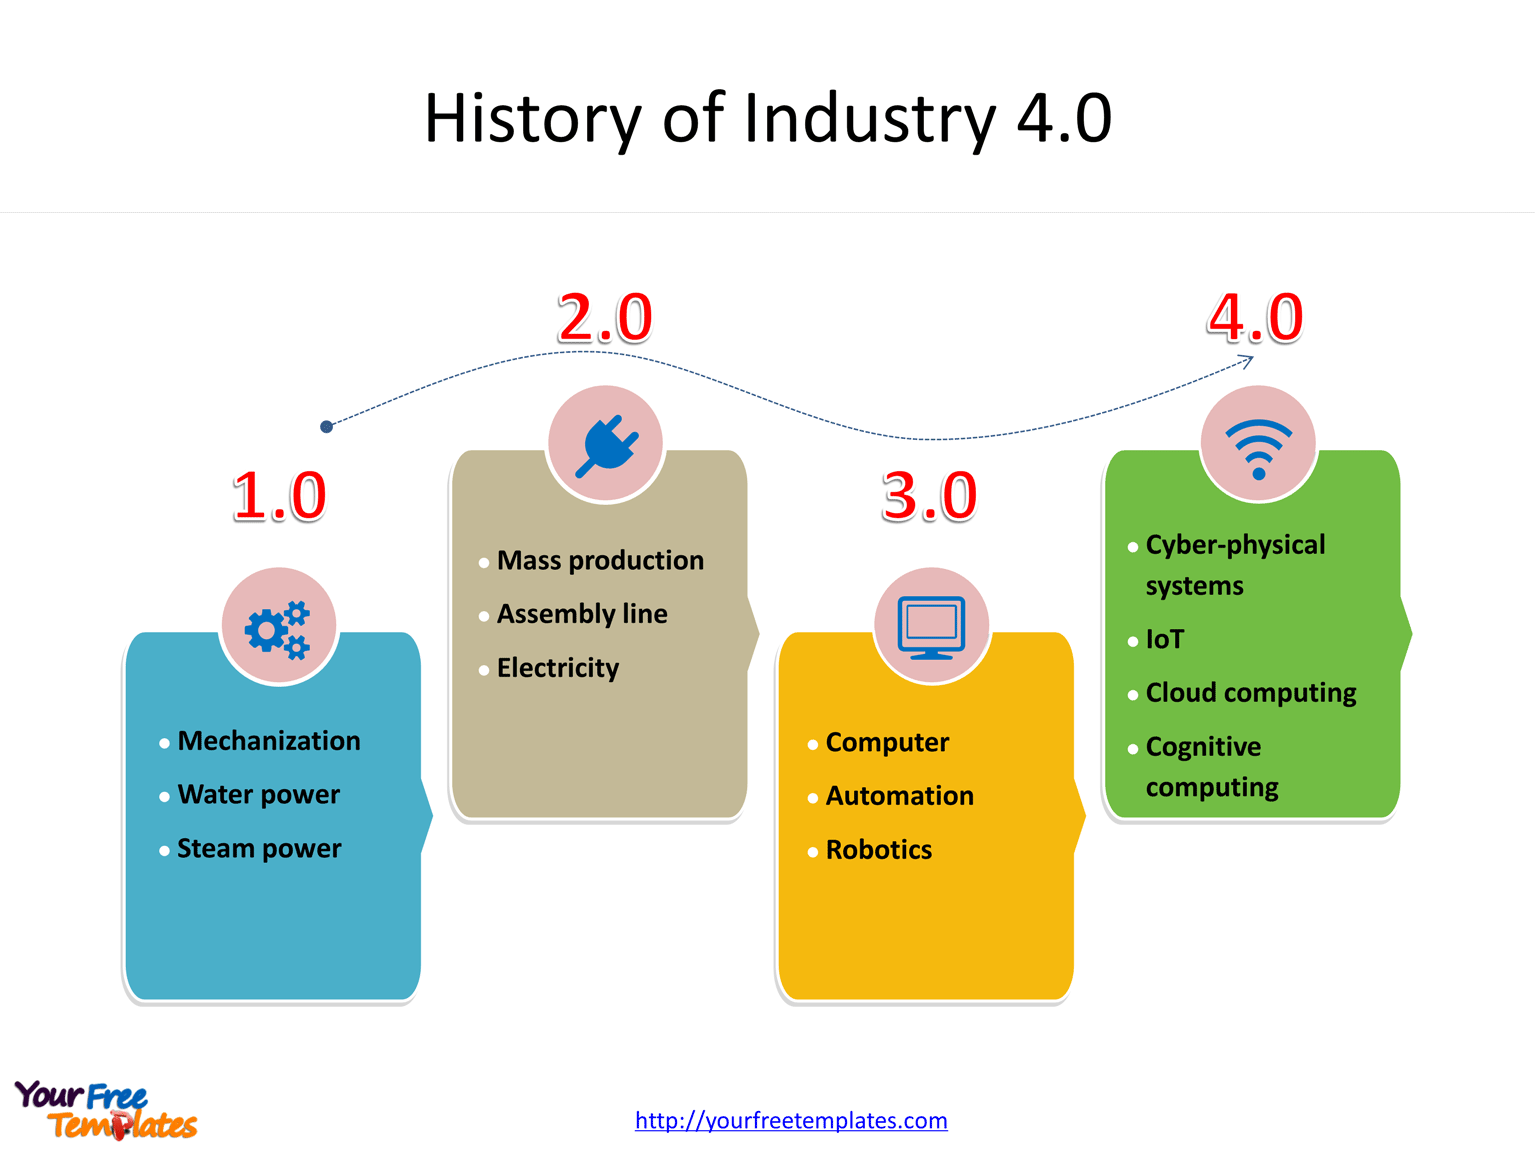 Industry 4.0 is an abstract and complex term consisting of many components when looking closely into our society and current digital trends.